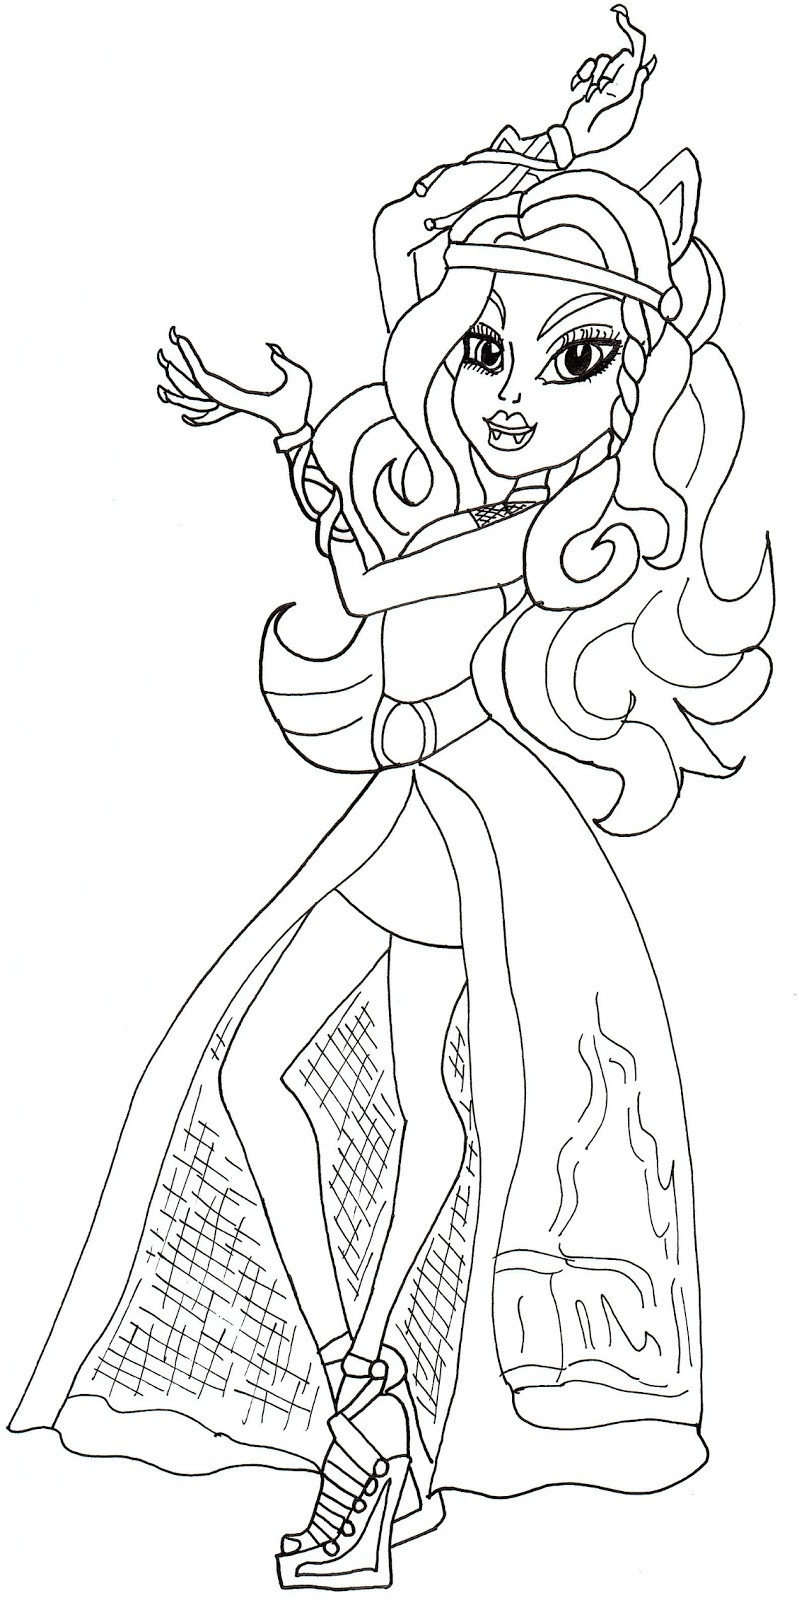 Free Printable Coloring Sheets Monster High
 Free Printable Monster High Coloring Pages June 2013